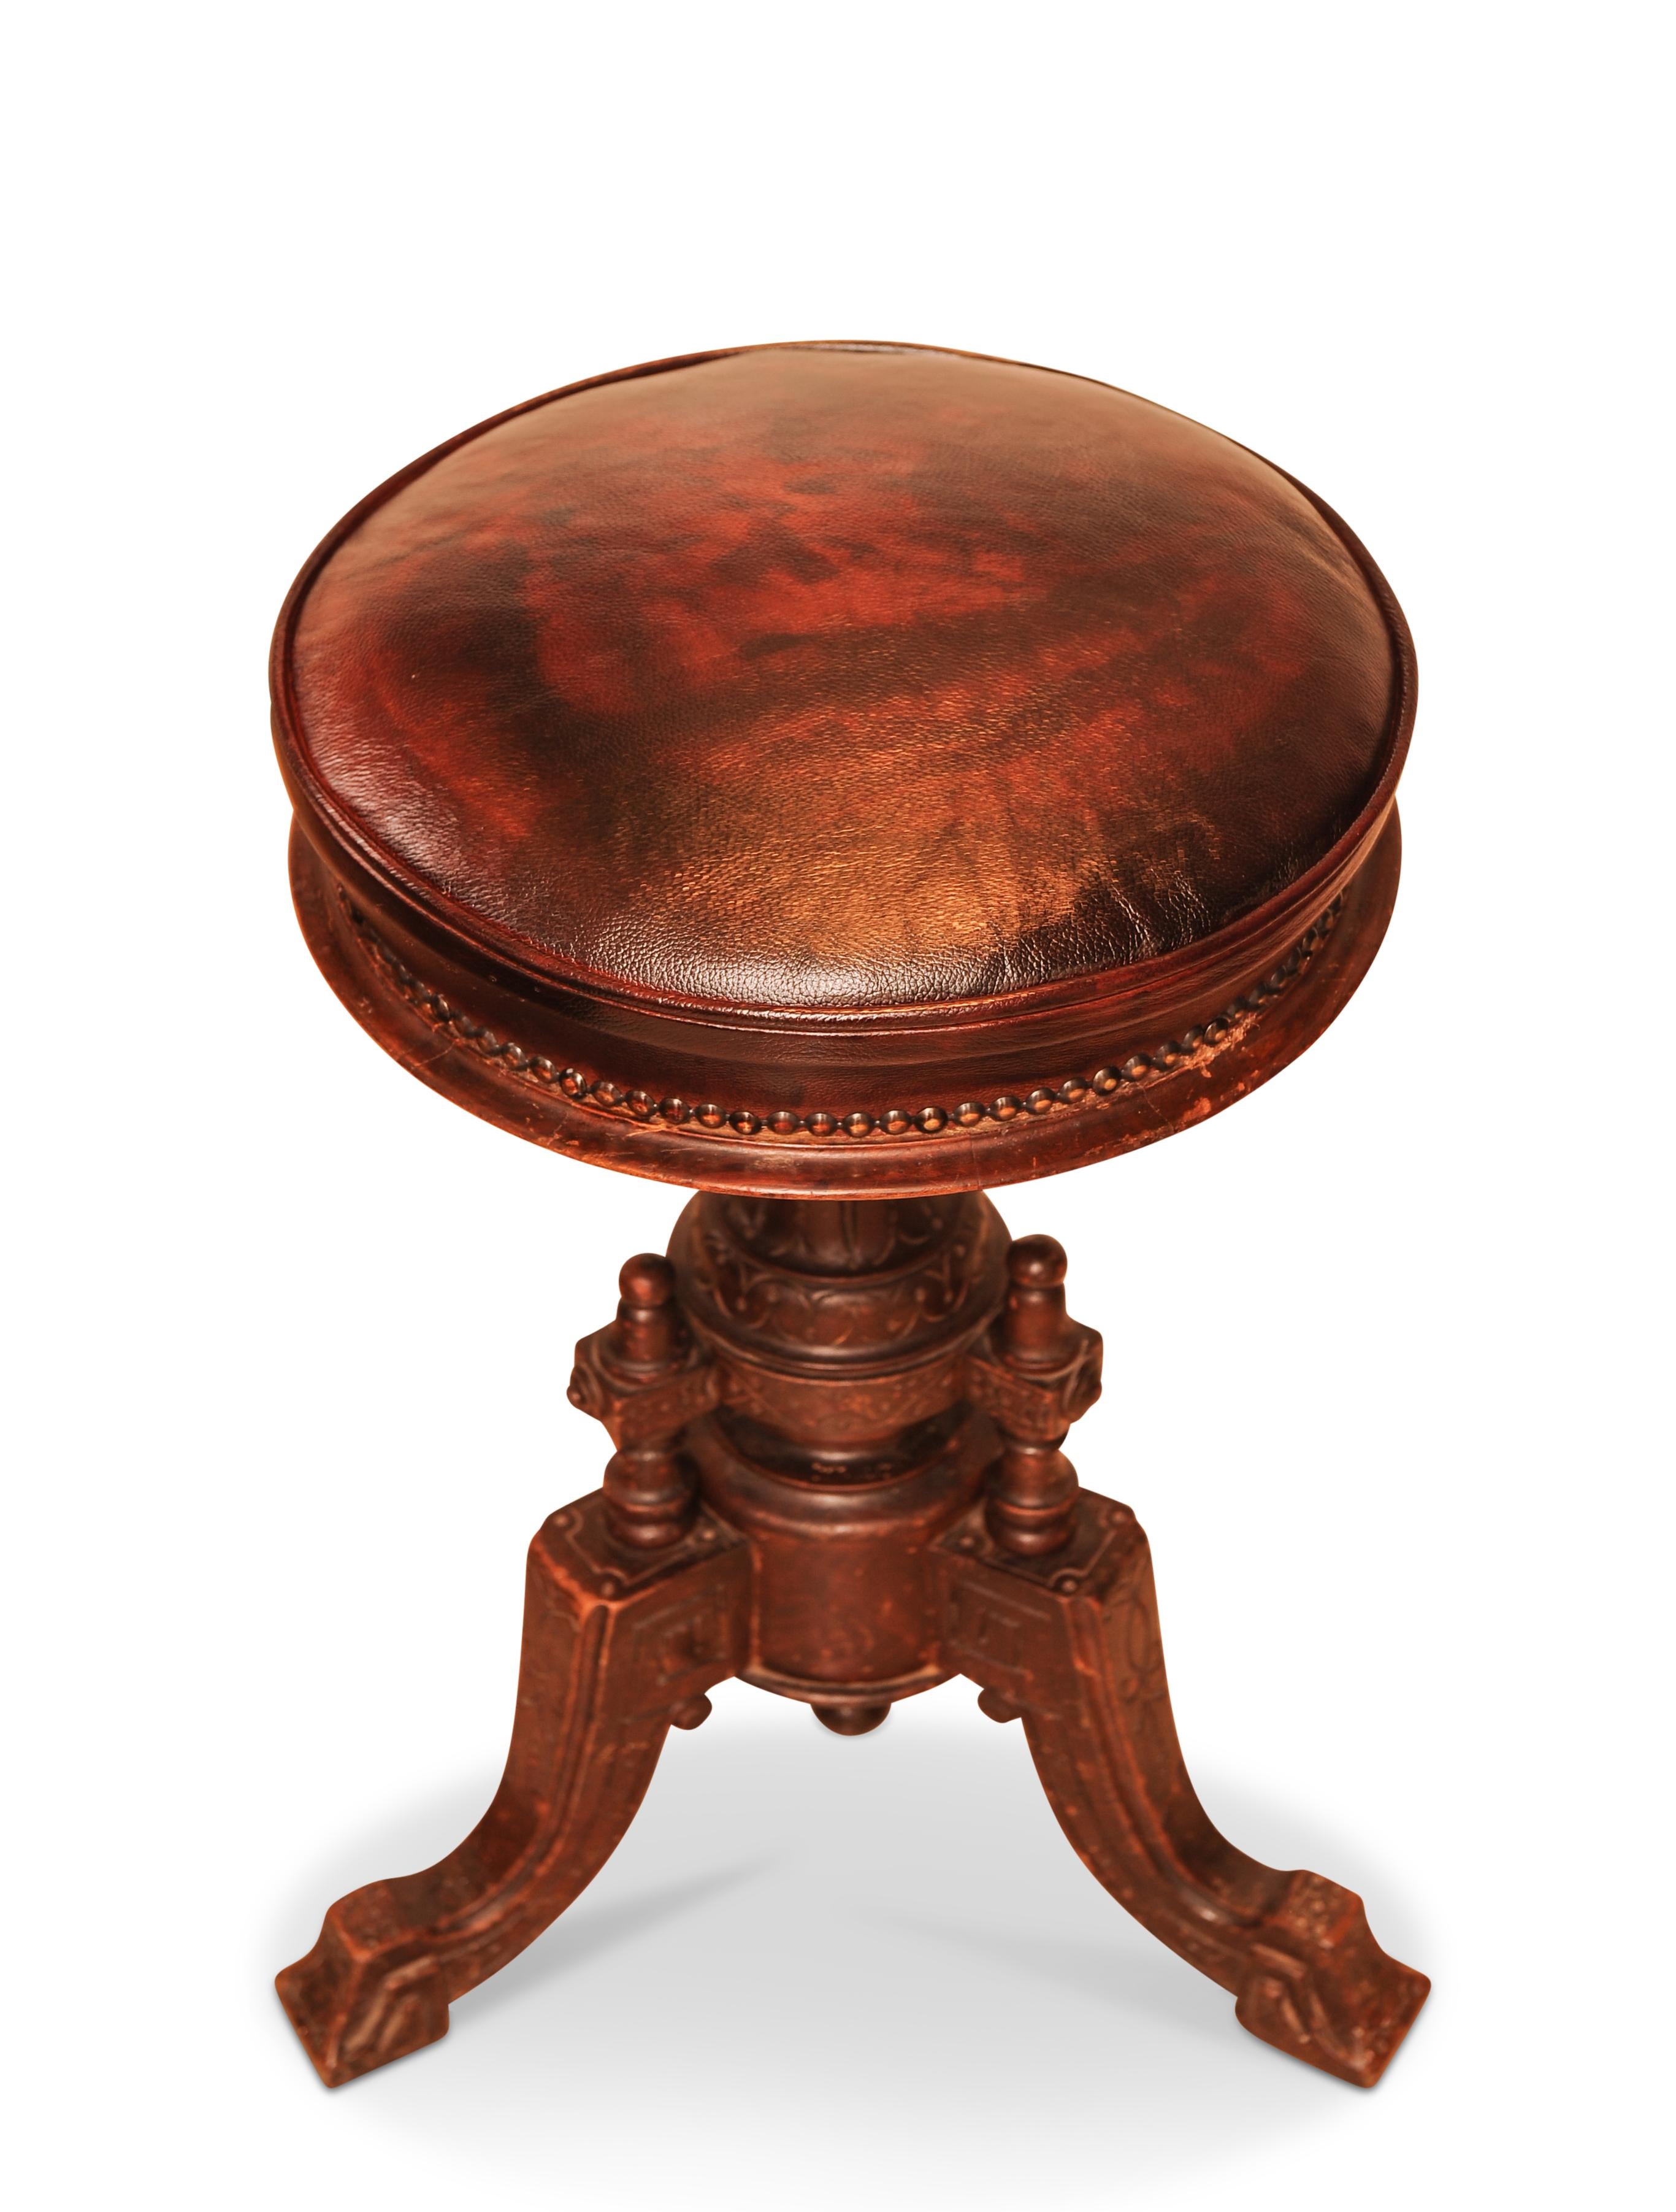 British Victorian Carved Wood Revolving Piano Stool With Brown Leather Seat Brass Studs For Sale